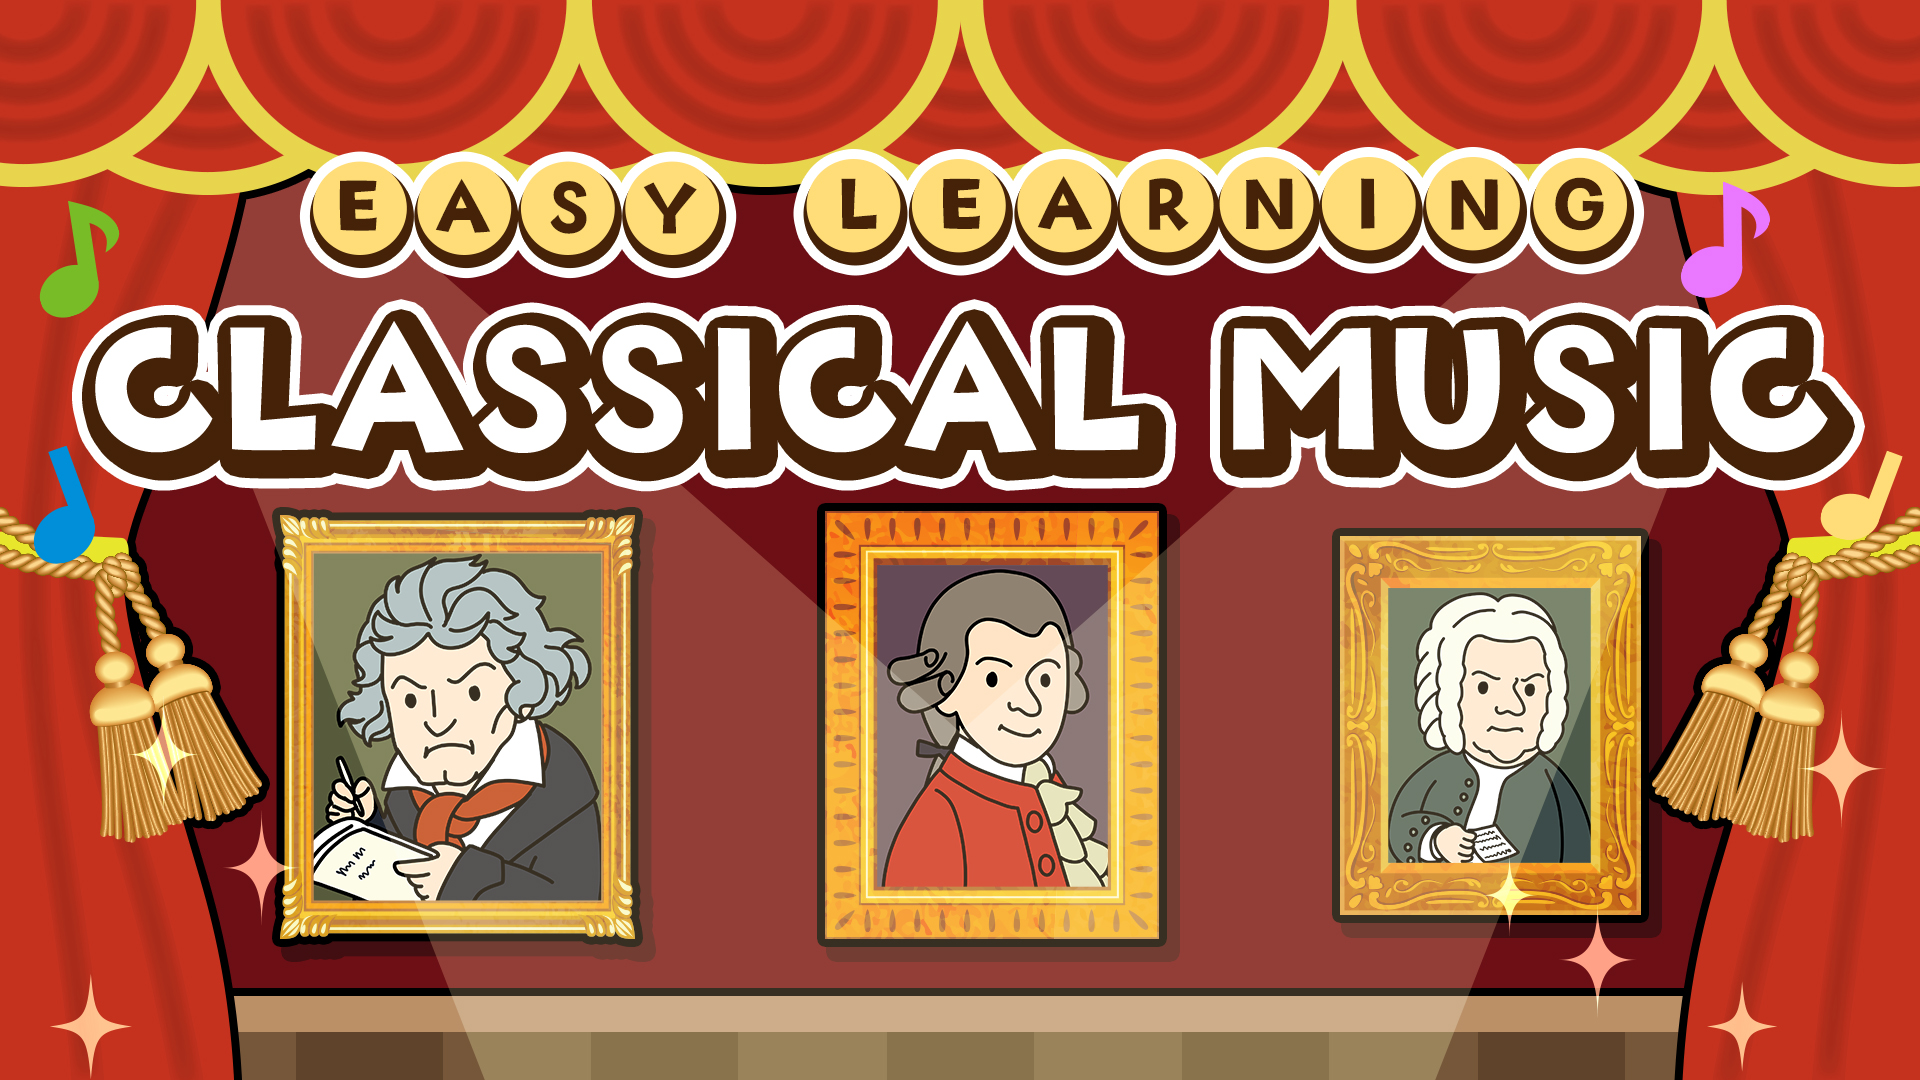 EASY LEARNING CLASSICAL MUSIC